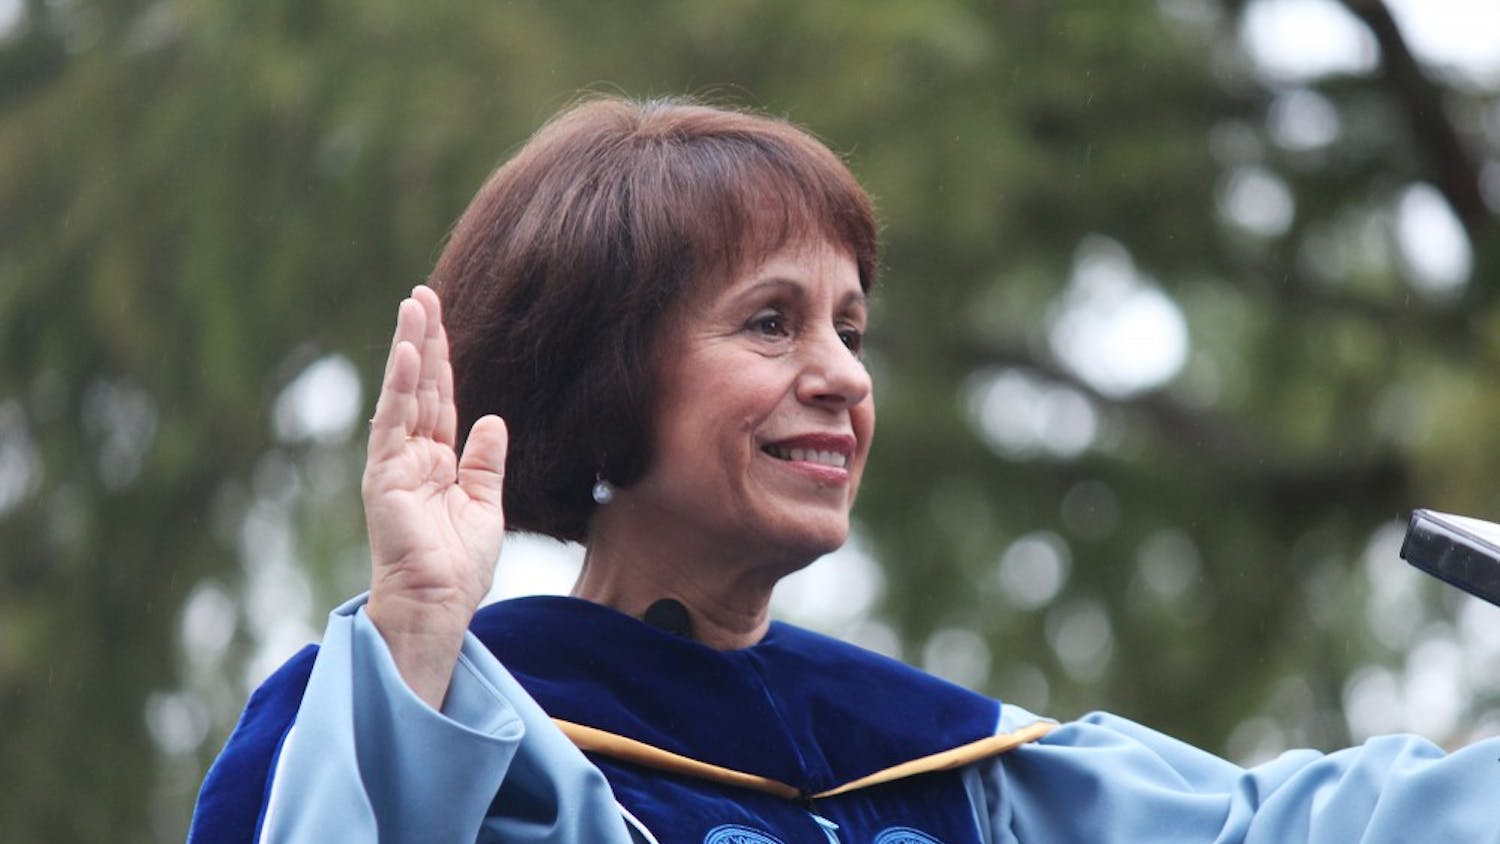 The installation ceremony of UNC's eleventh chancellor, Carol Folt, was held on University Day, October 12. The ceremony took place outside of South Building at 2 pm and a reception was held in Polk Place after the ceremony.